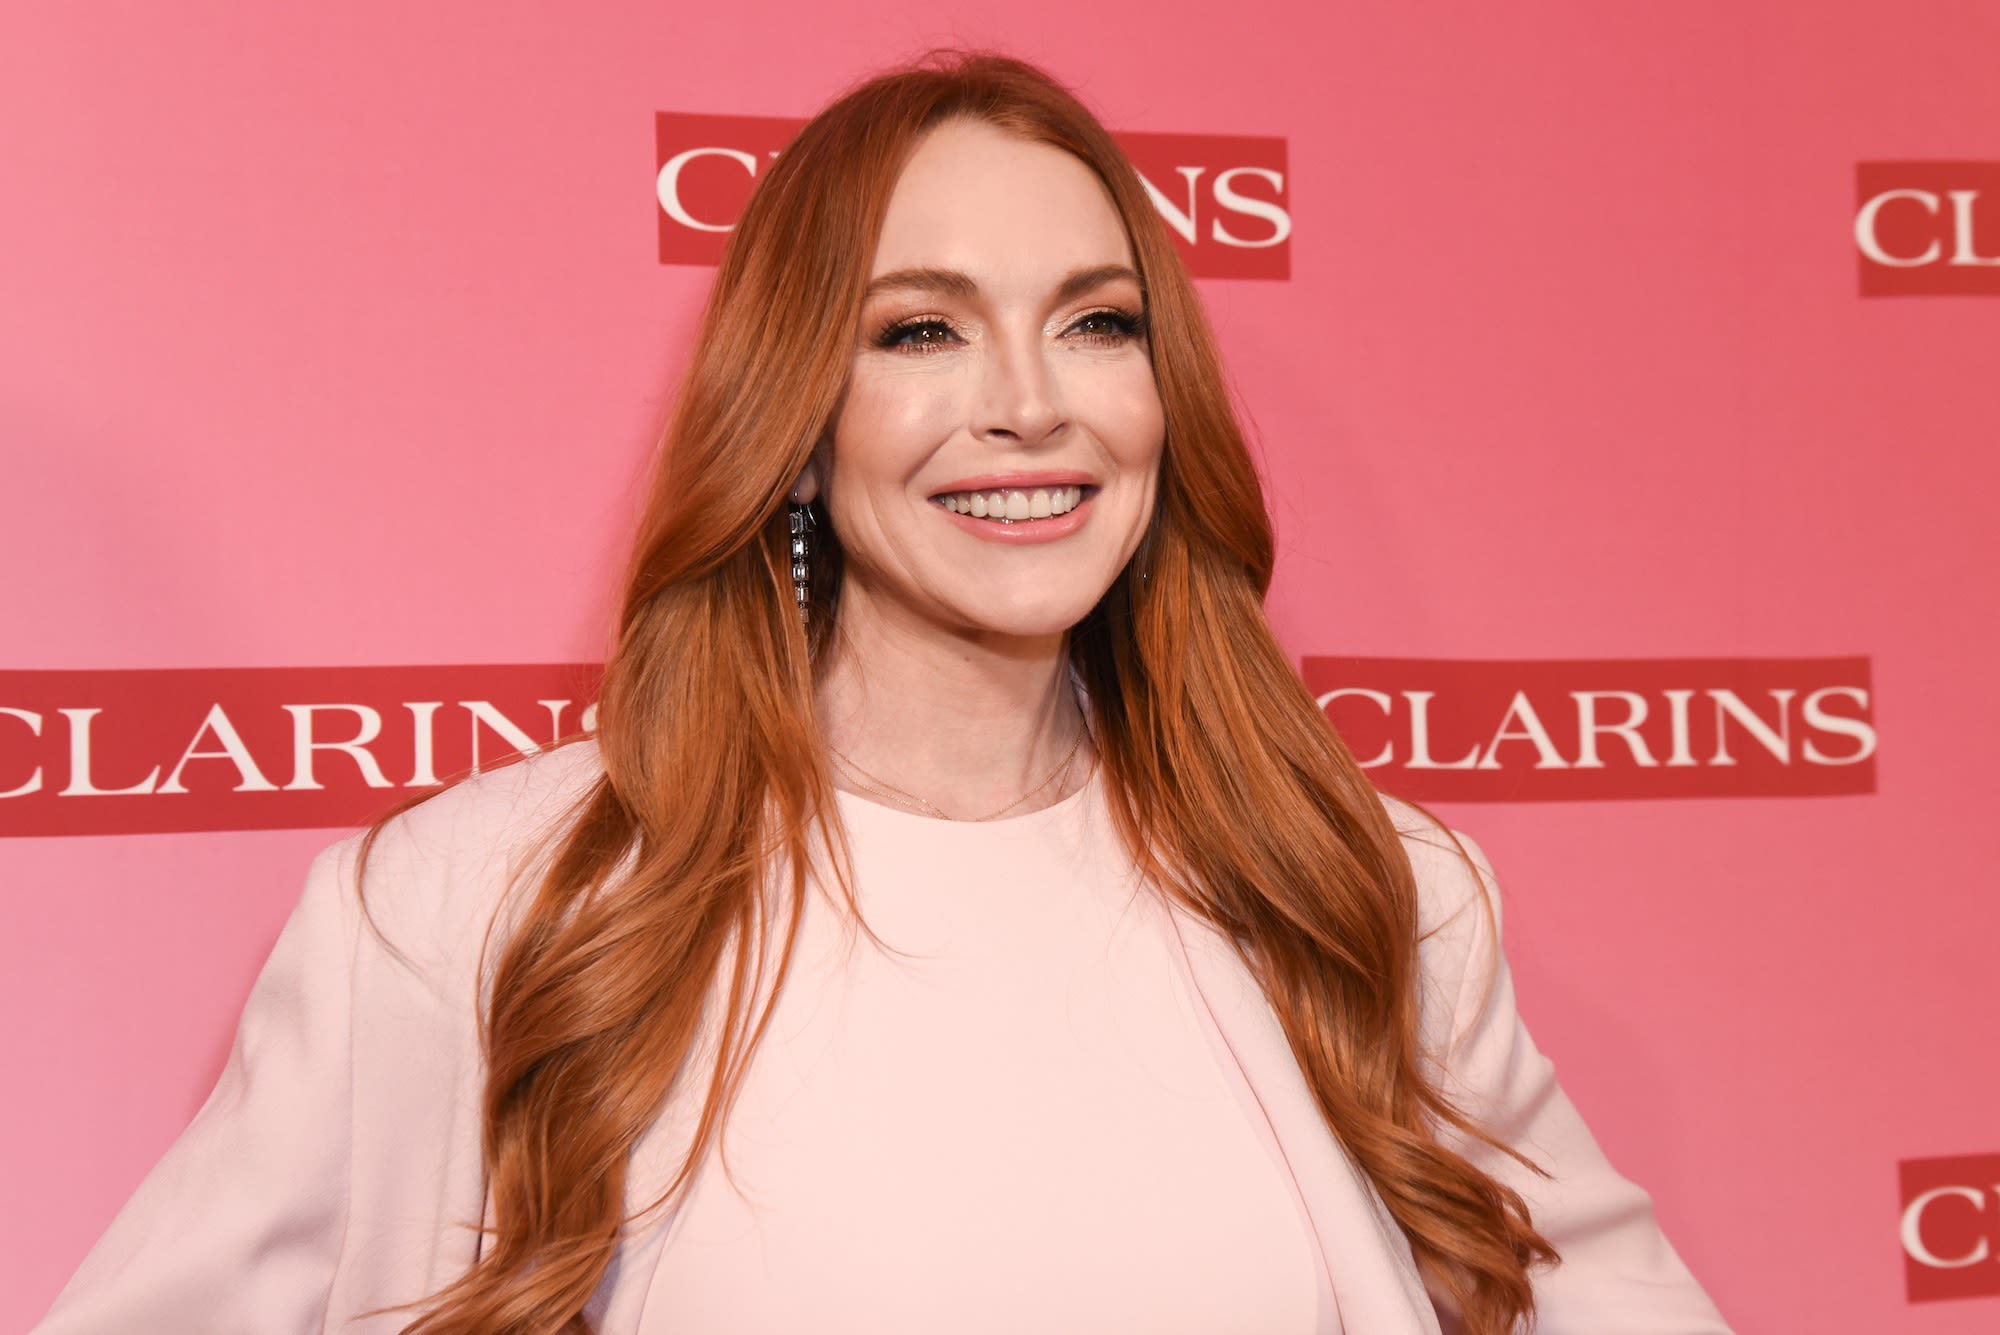 Ginger Hair and Freckles Are Having a Moment Thanks to Lindsay Lohan